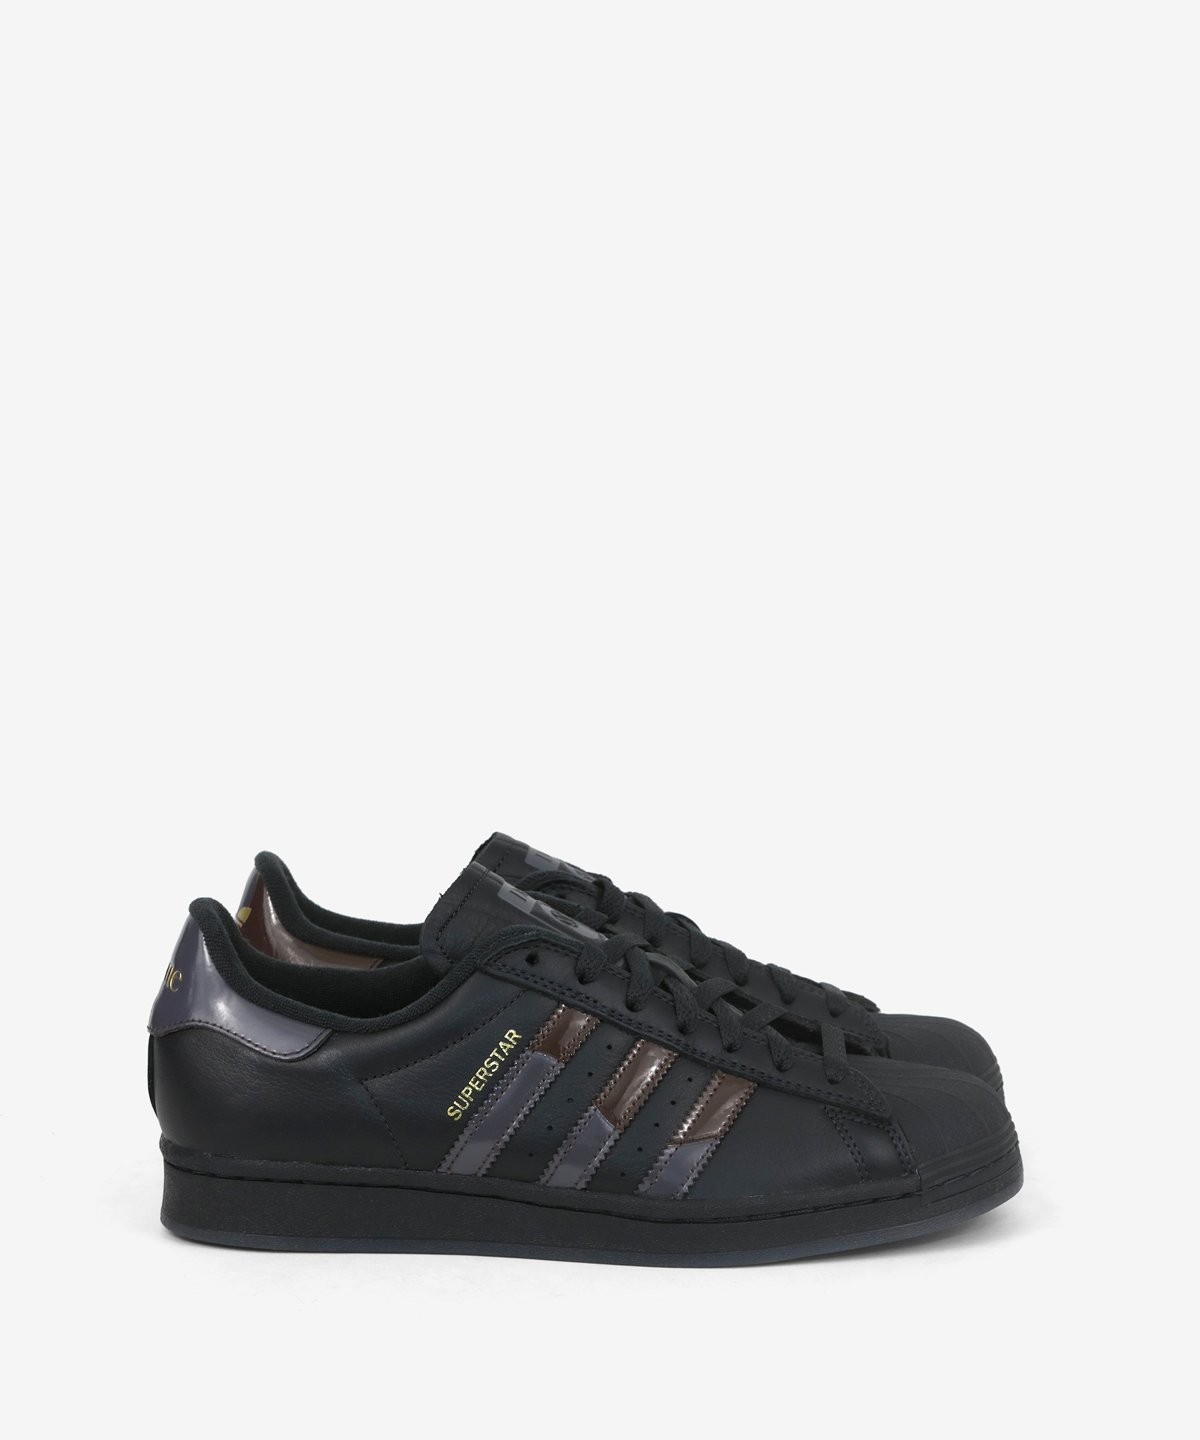 Image of DIME X ADIDAS_SUPERSTAR ADV :::CARBON/BROWN:::